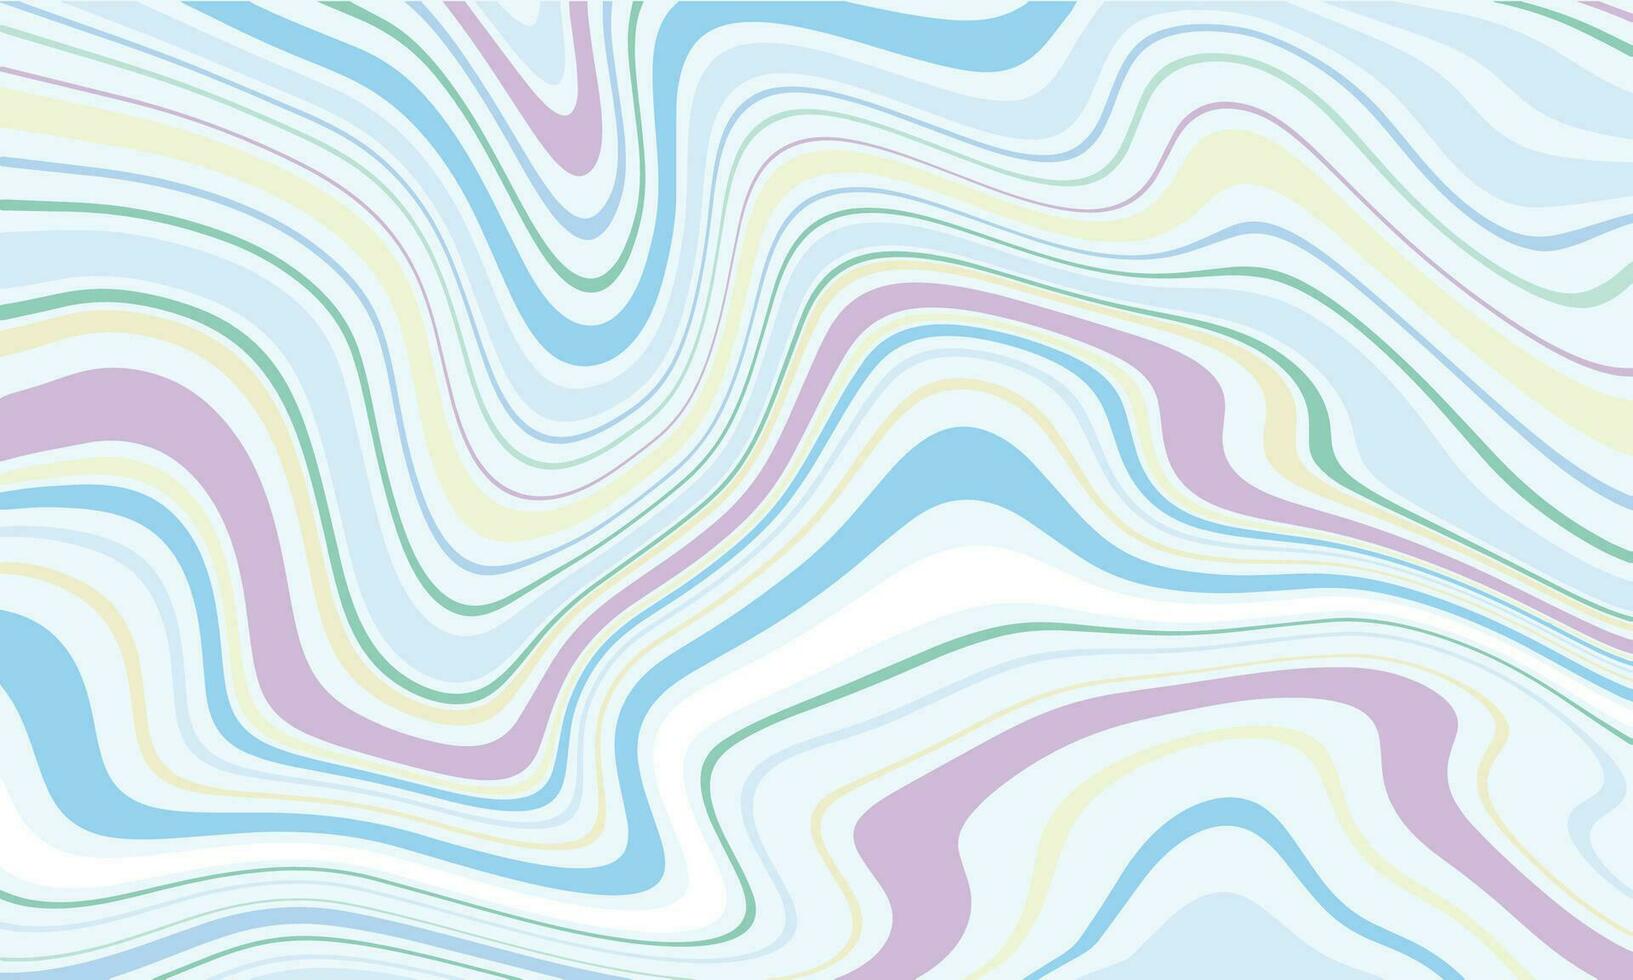 Vector psychedelic y2k background 2000. vector illustration in retro aesthetic 1990 style